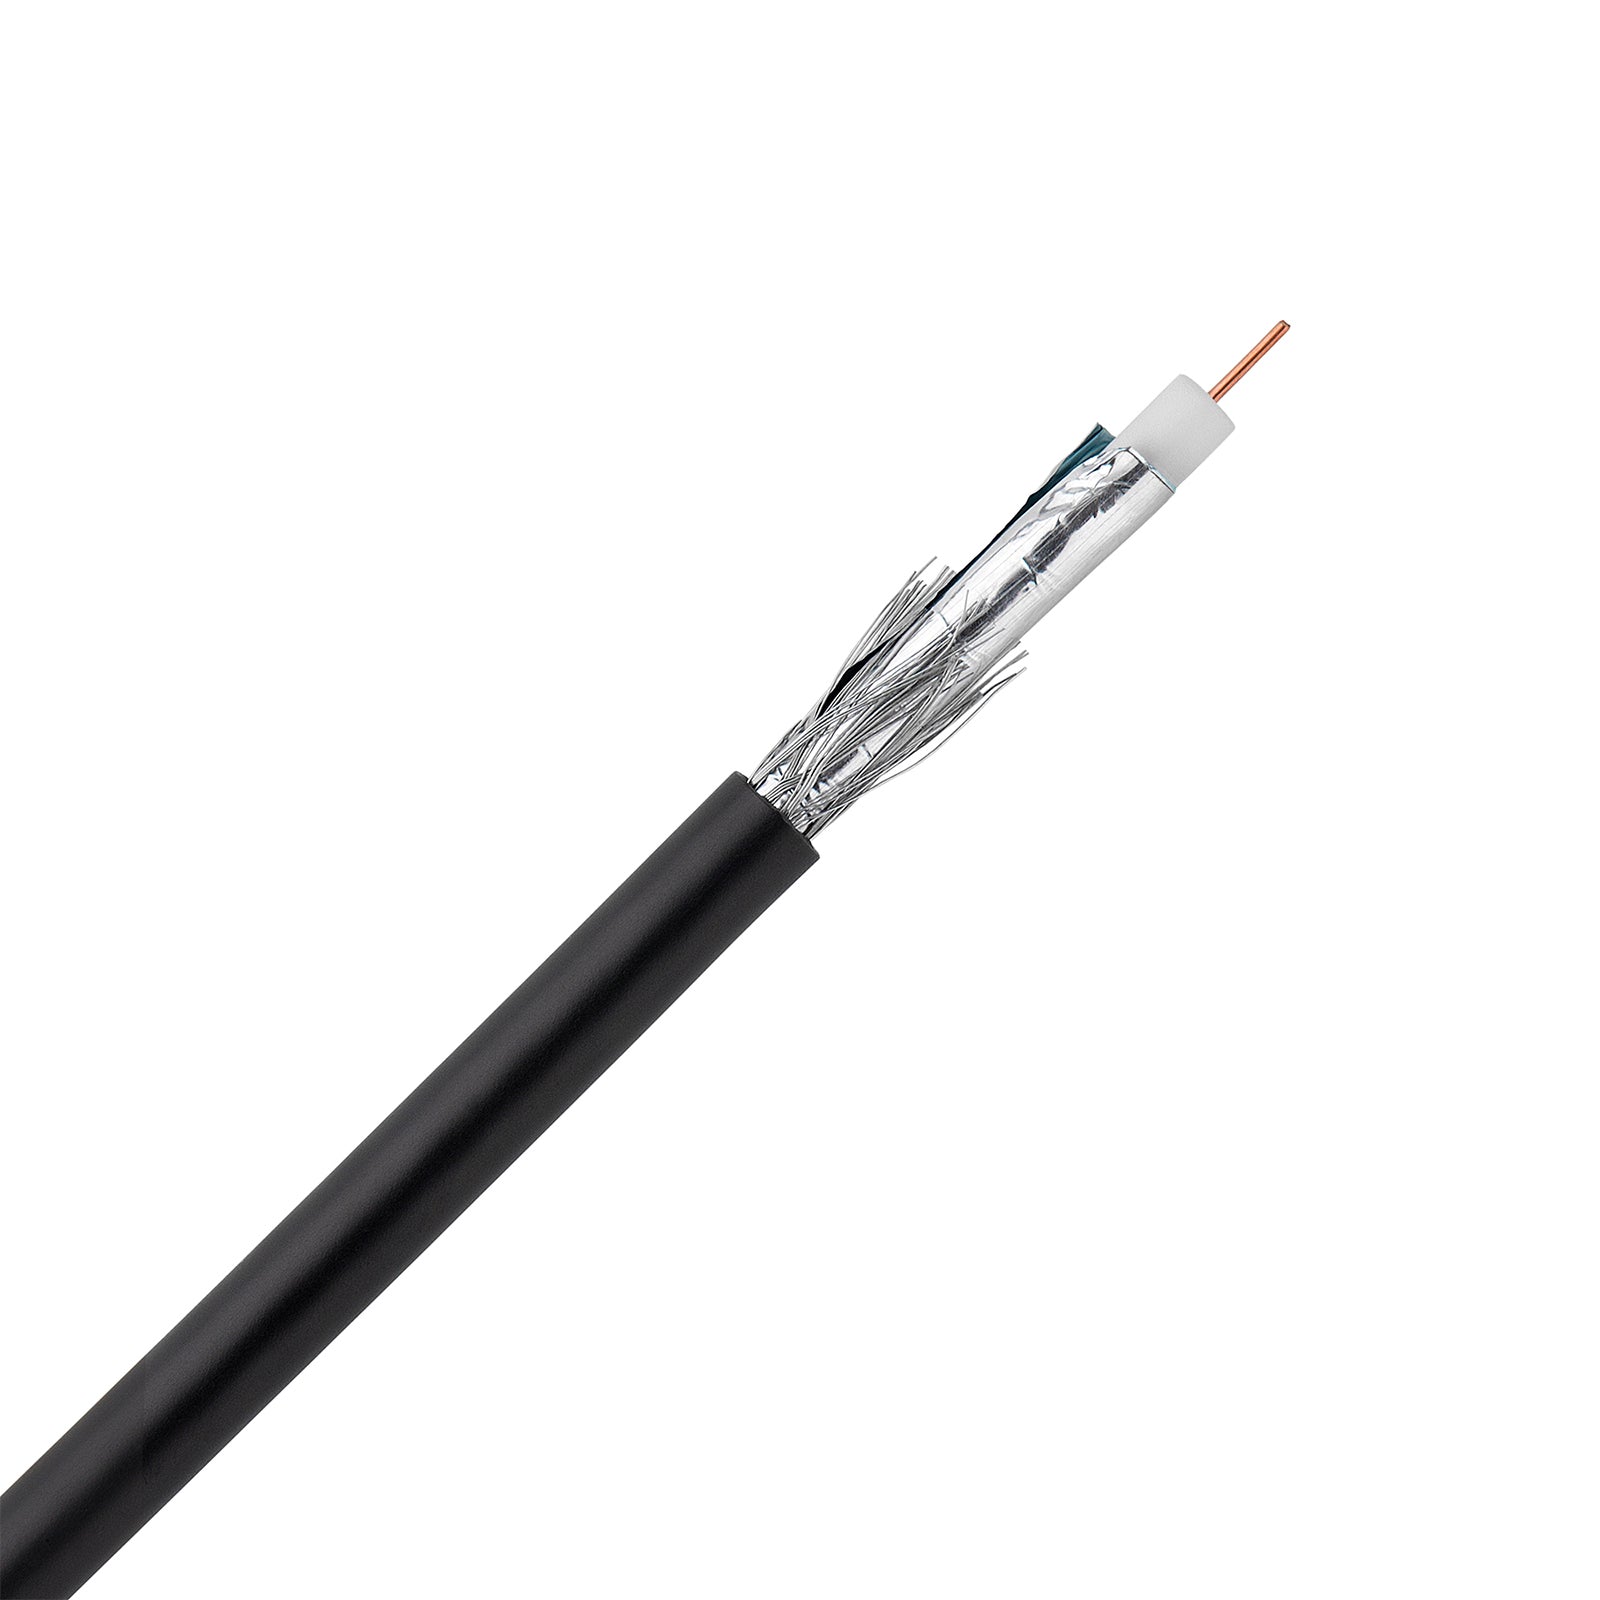 75 Ohm Coaxial Cable - Per Metre